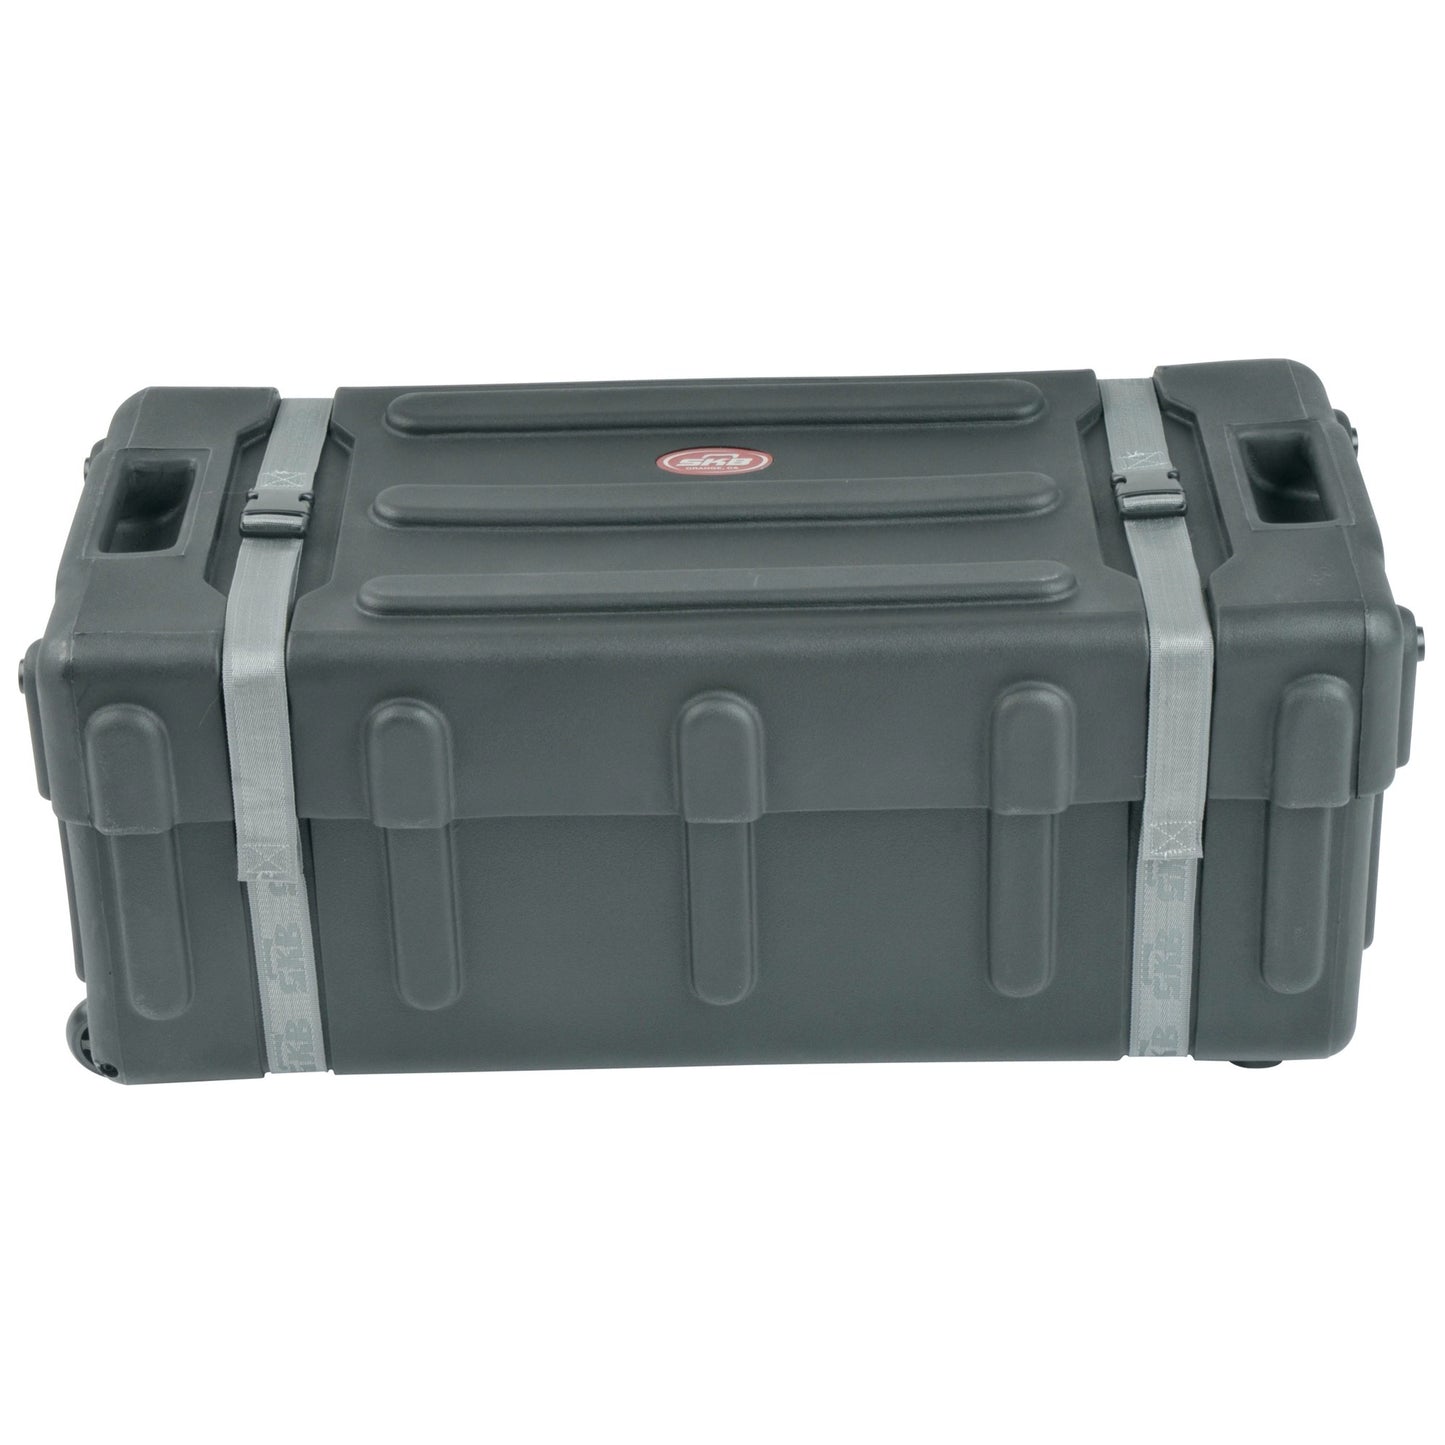 SKB DH3315W Mid-Sized Hardware Case with Wheels